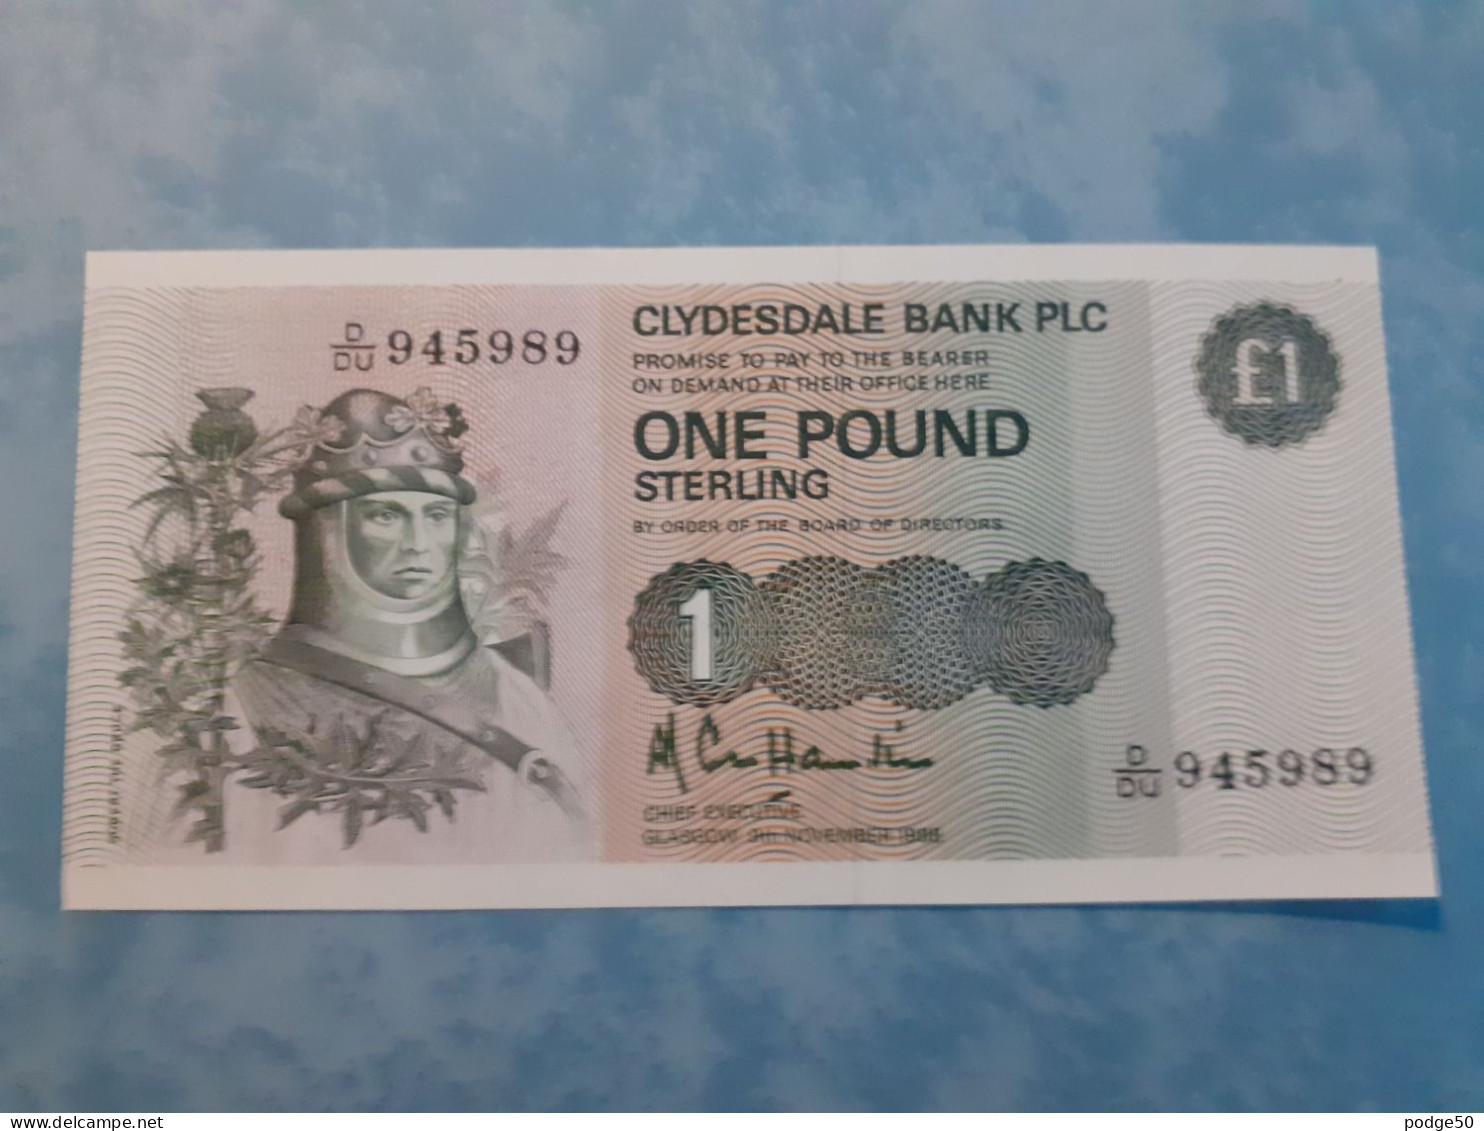 CLYDESDALE BANK 1988 LAST YEAR UNCIRCULATED £1 SIGNED A R COLE HAMILTON D/DU 945989 - 1 Pound